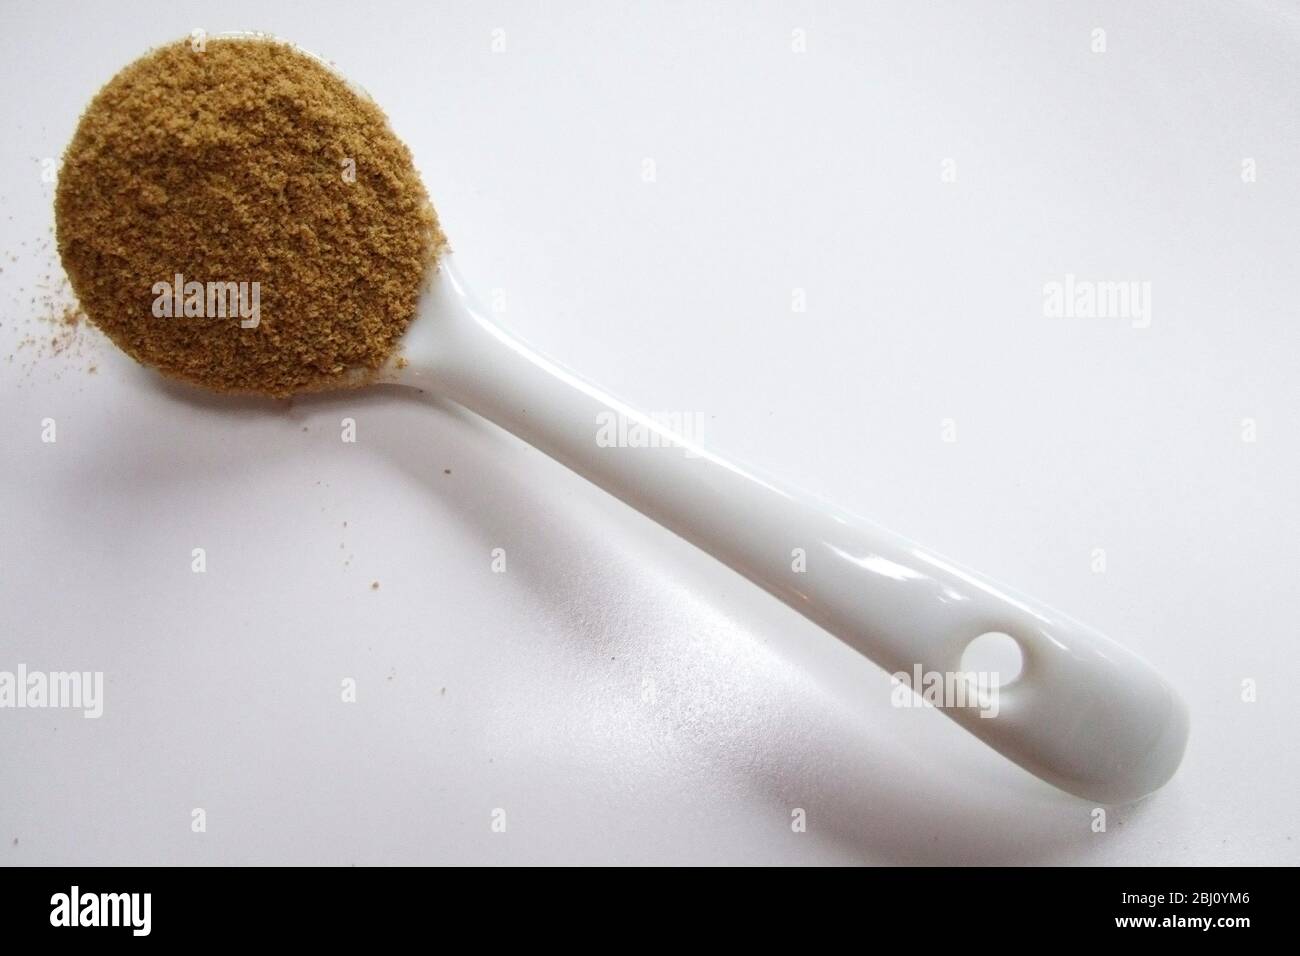 Porcelain spoon heaped with ground cumin powder on white ceramic surface - Stock Photo